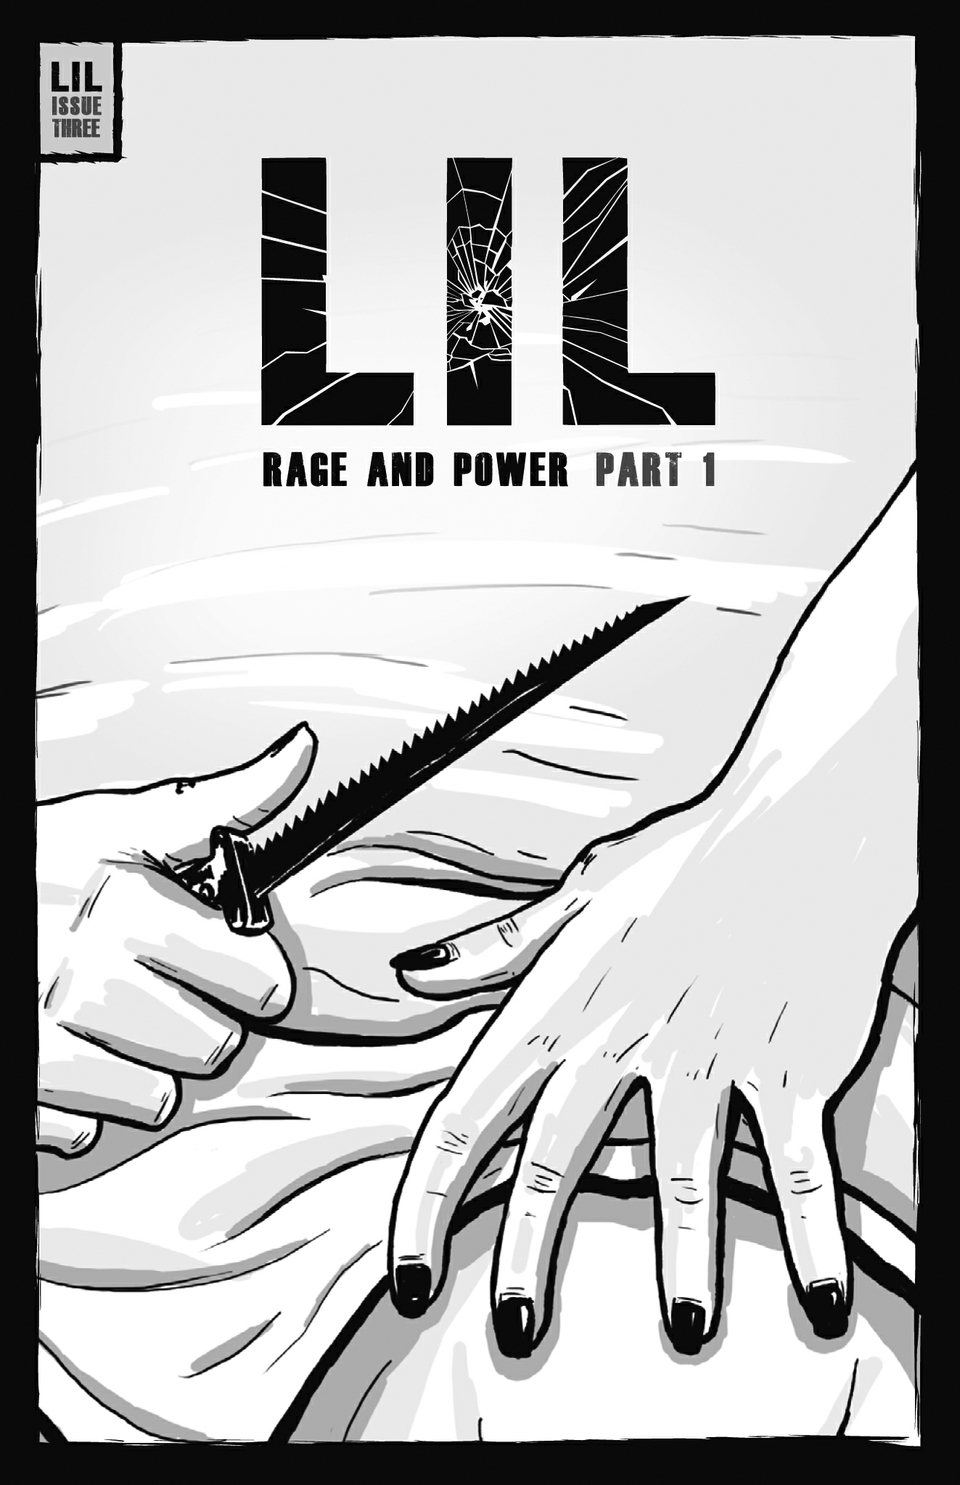 LIL - ISSUE 3 - RAGE AND POWER - PART 1 - FRONT COVER